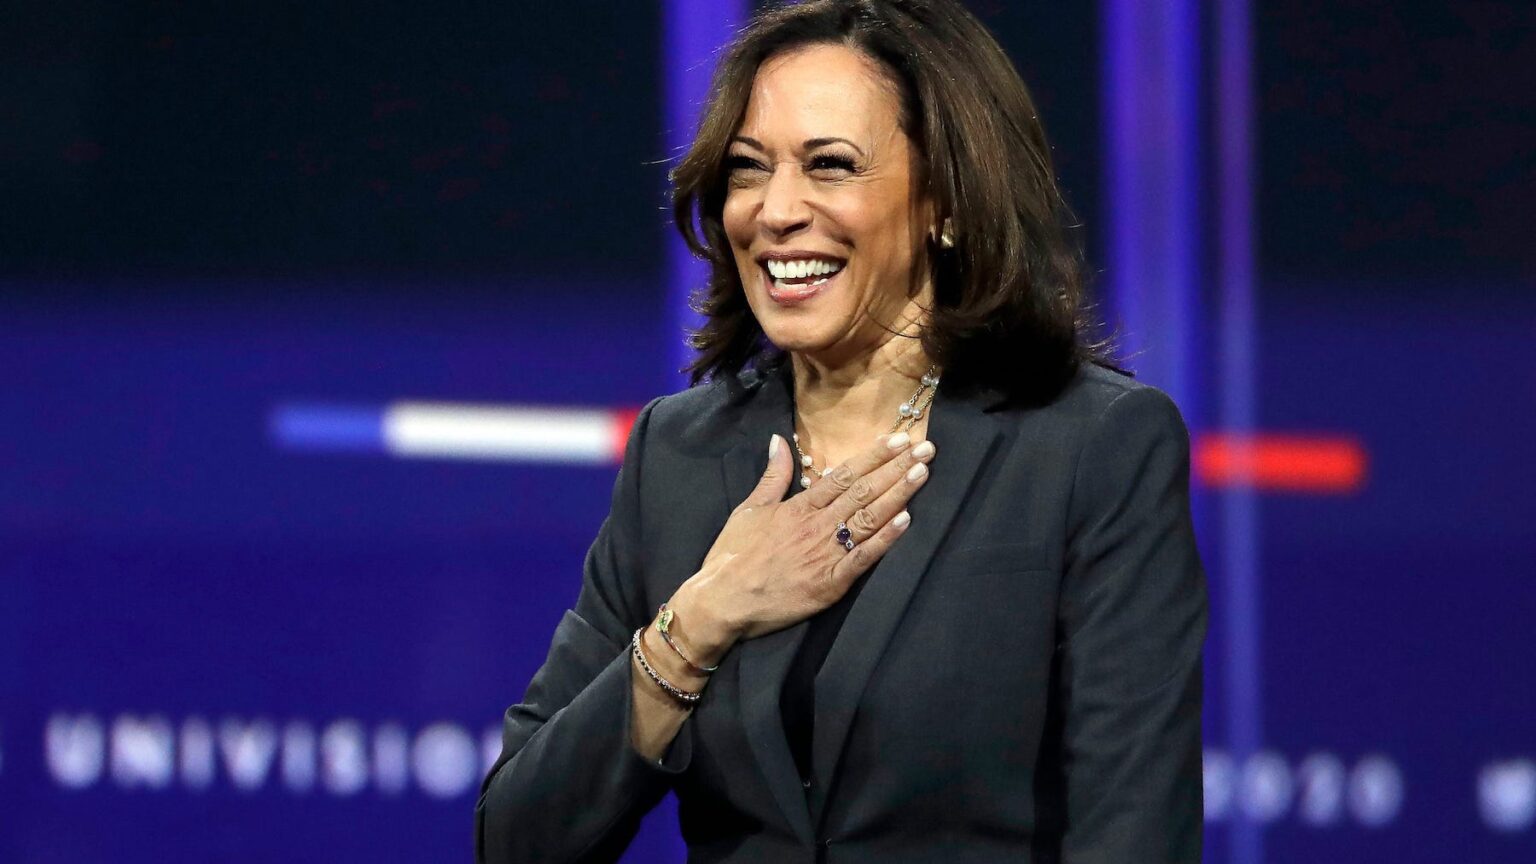 With the Inauguration Ceremony just hours away, Joe Biden & Kamala Harris are the talk of the town. What is Harris's net worth?